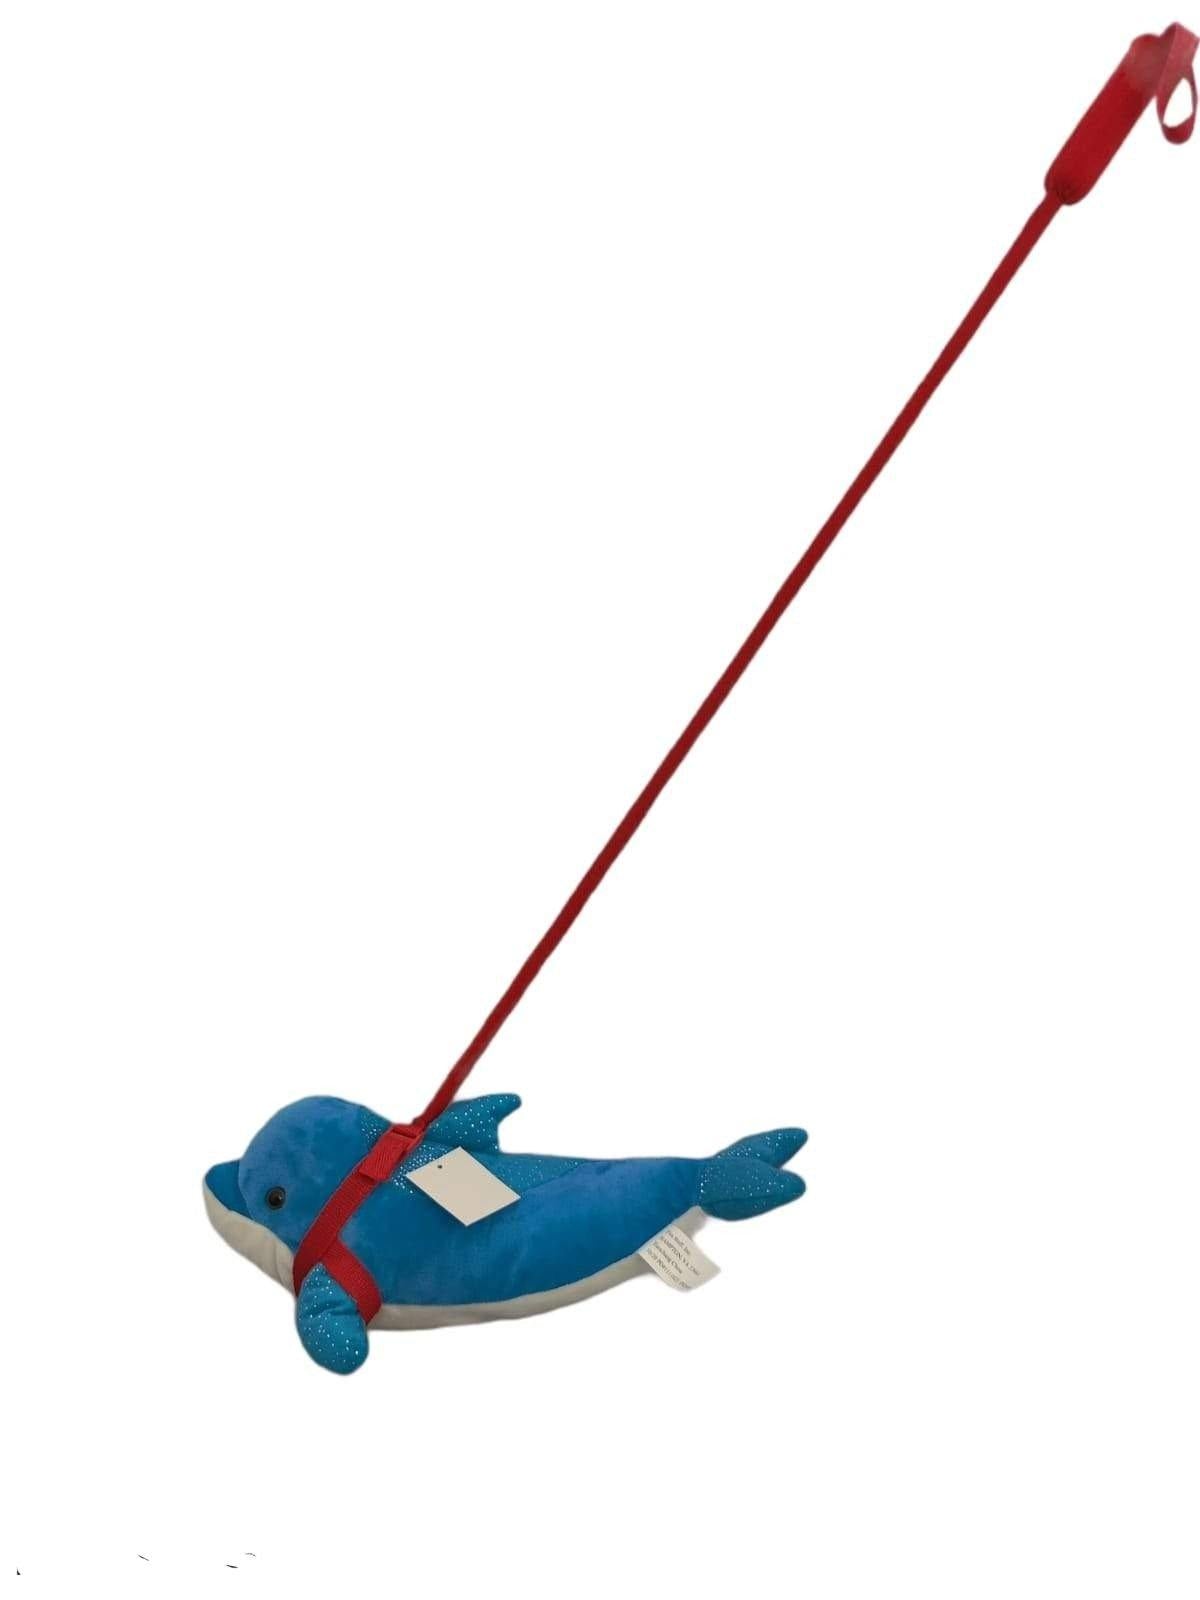 Sea Life Plush Toy On An Extendable Red Leash